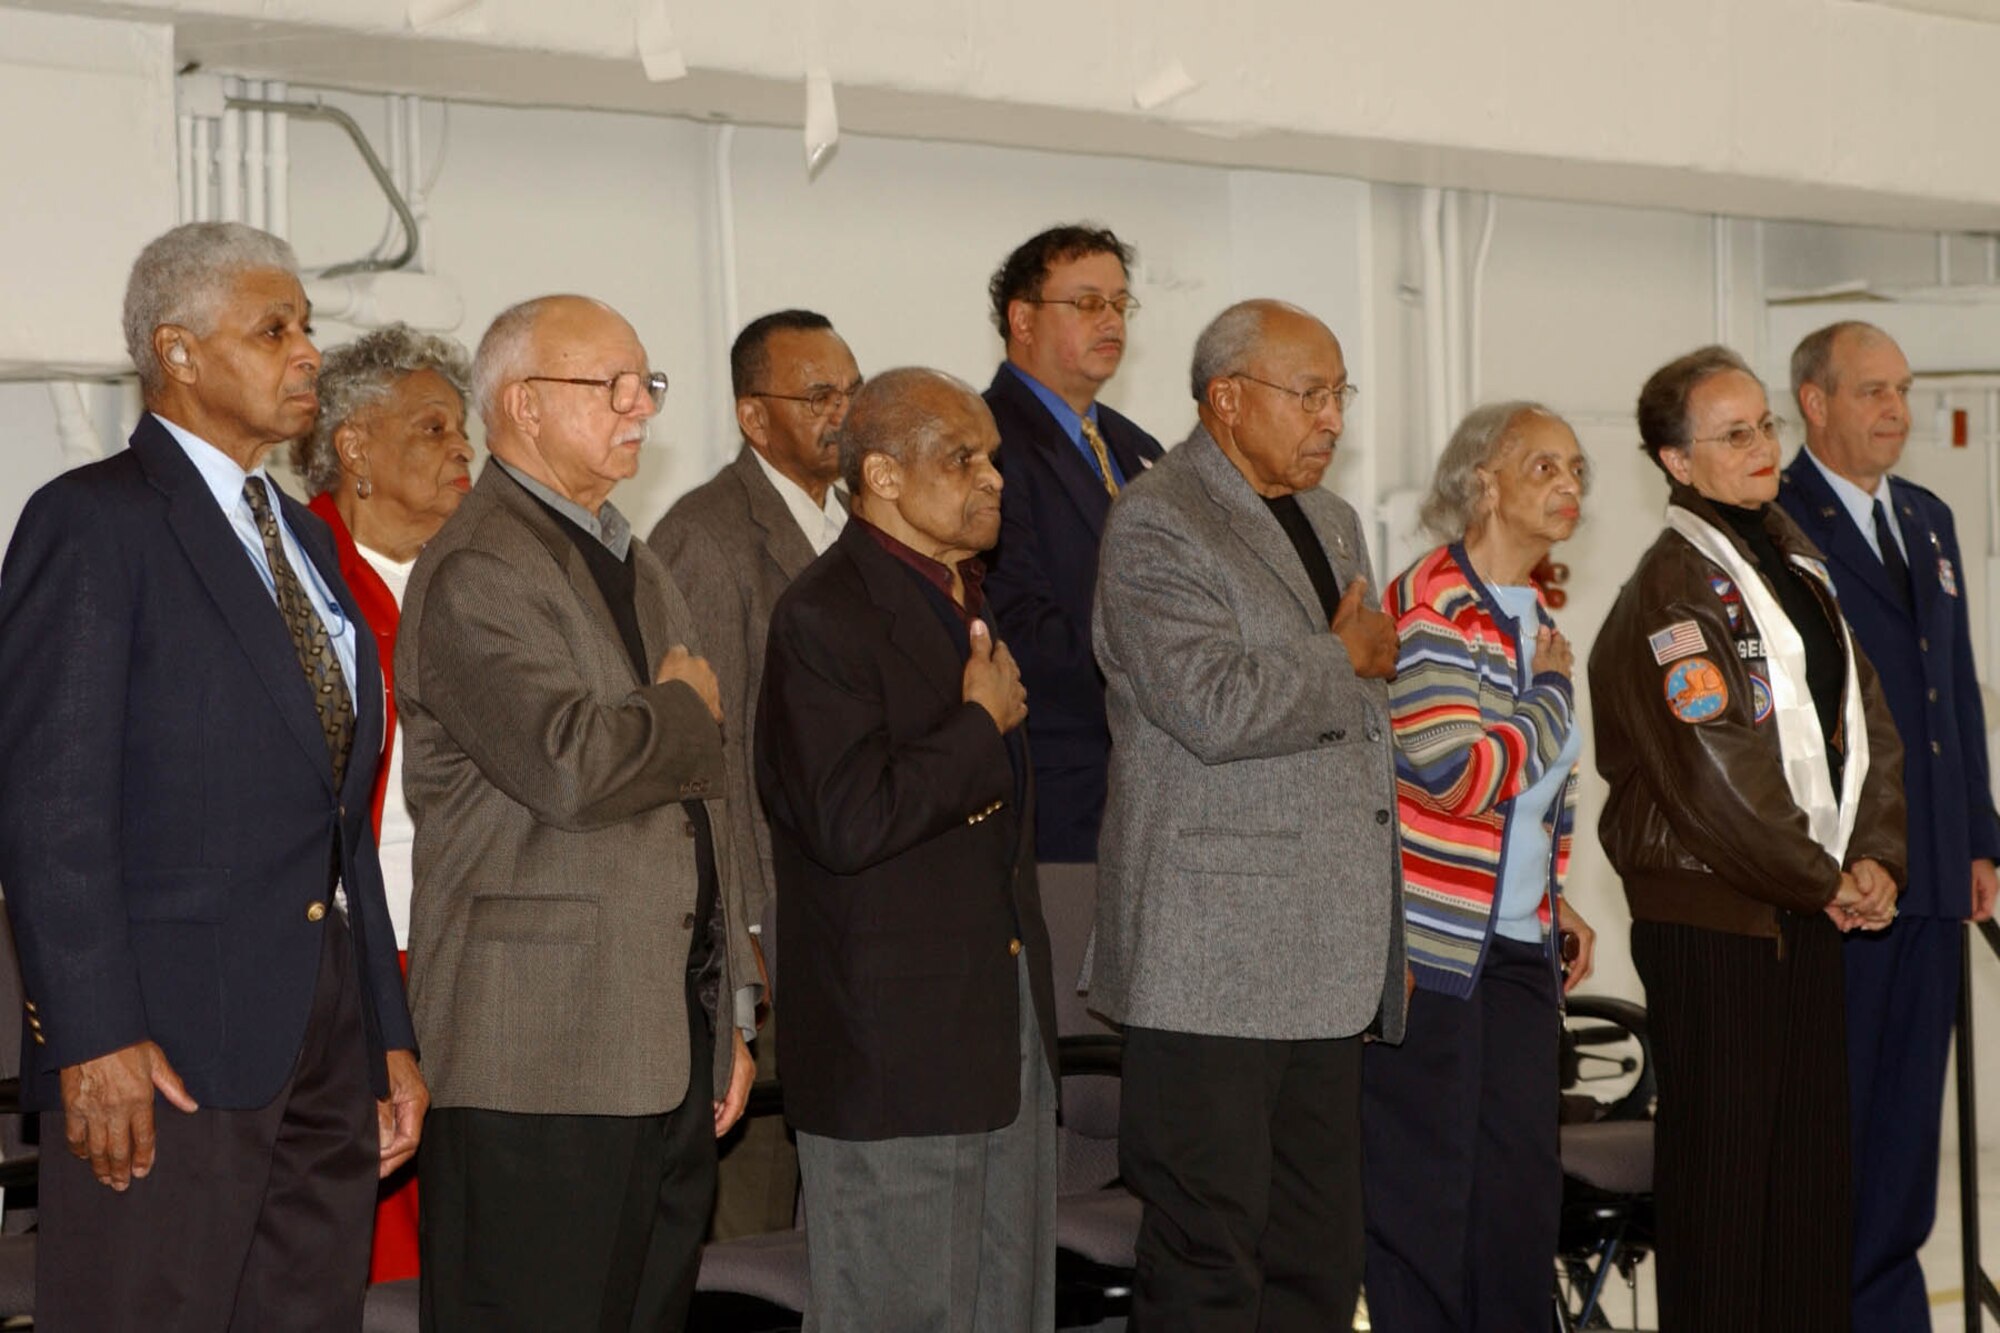 Members of Iowa's Tuskegee Airmen gather to witness the dedication of the 132d Wing's P-51 Mustang "Dutchess Arlene" static display.  (Courtesy photo)